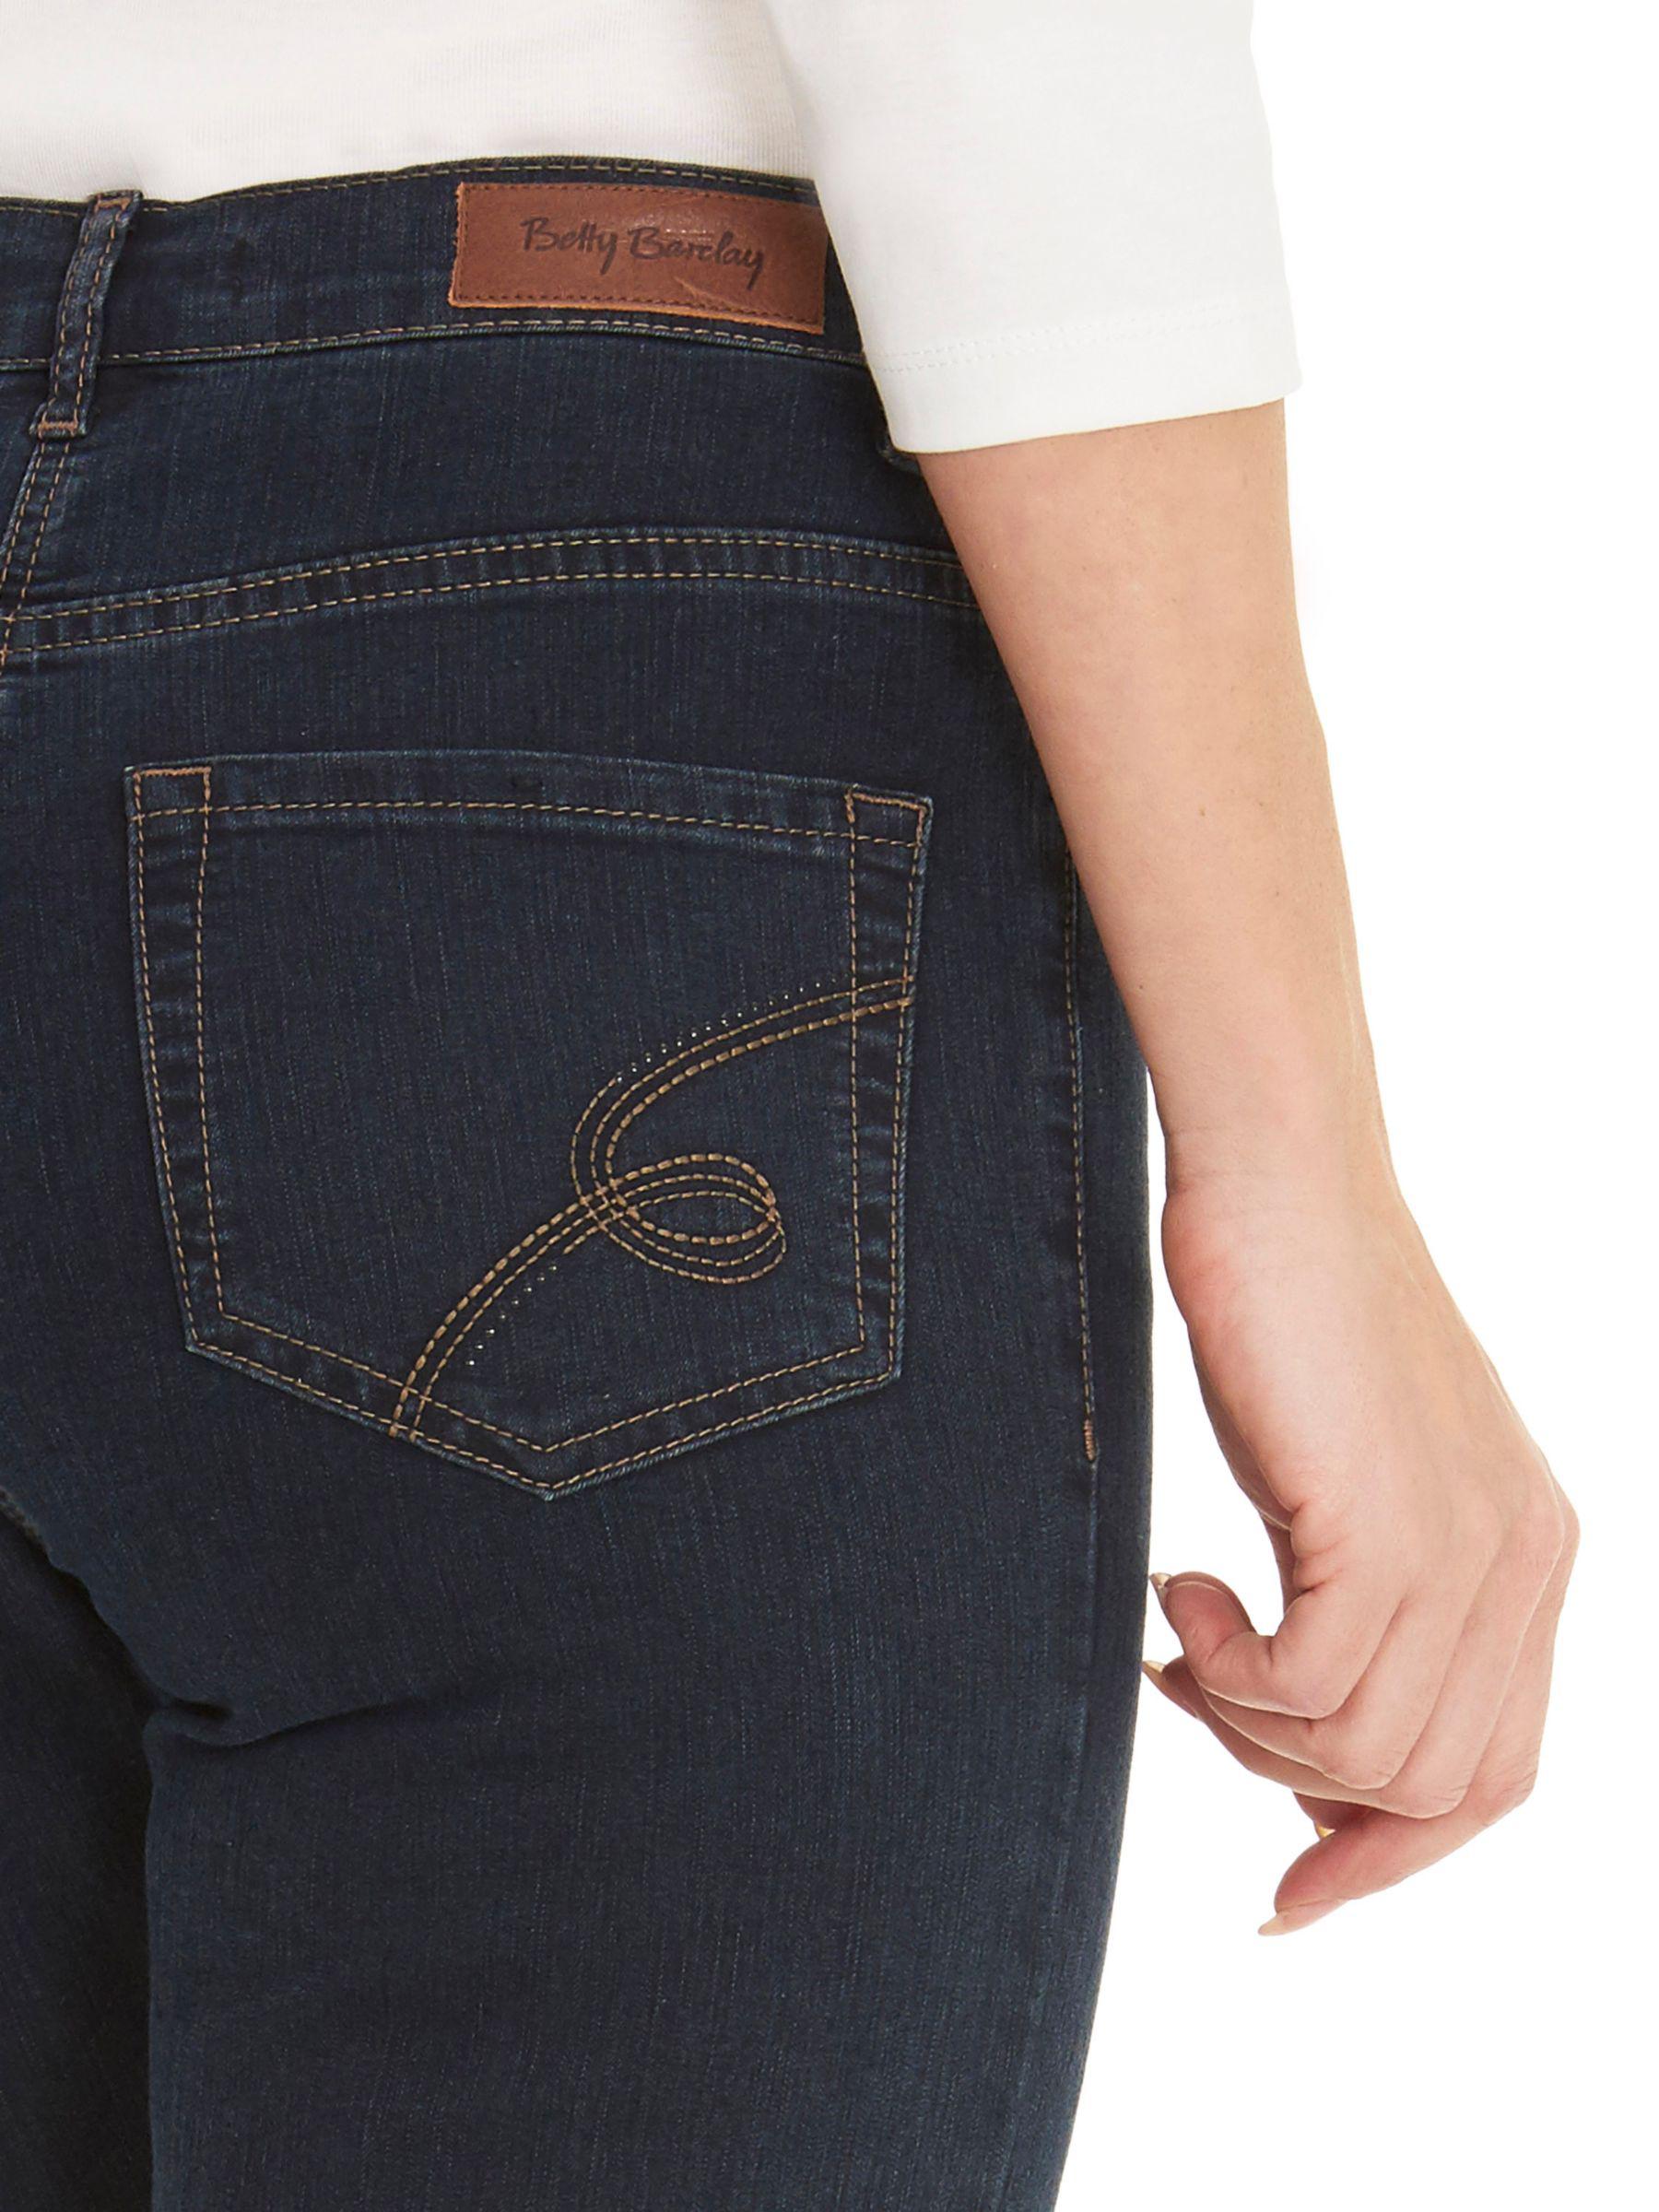 betty barclay jeans